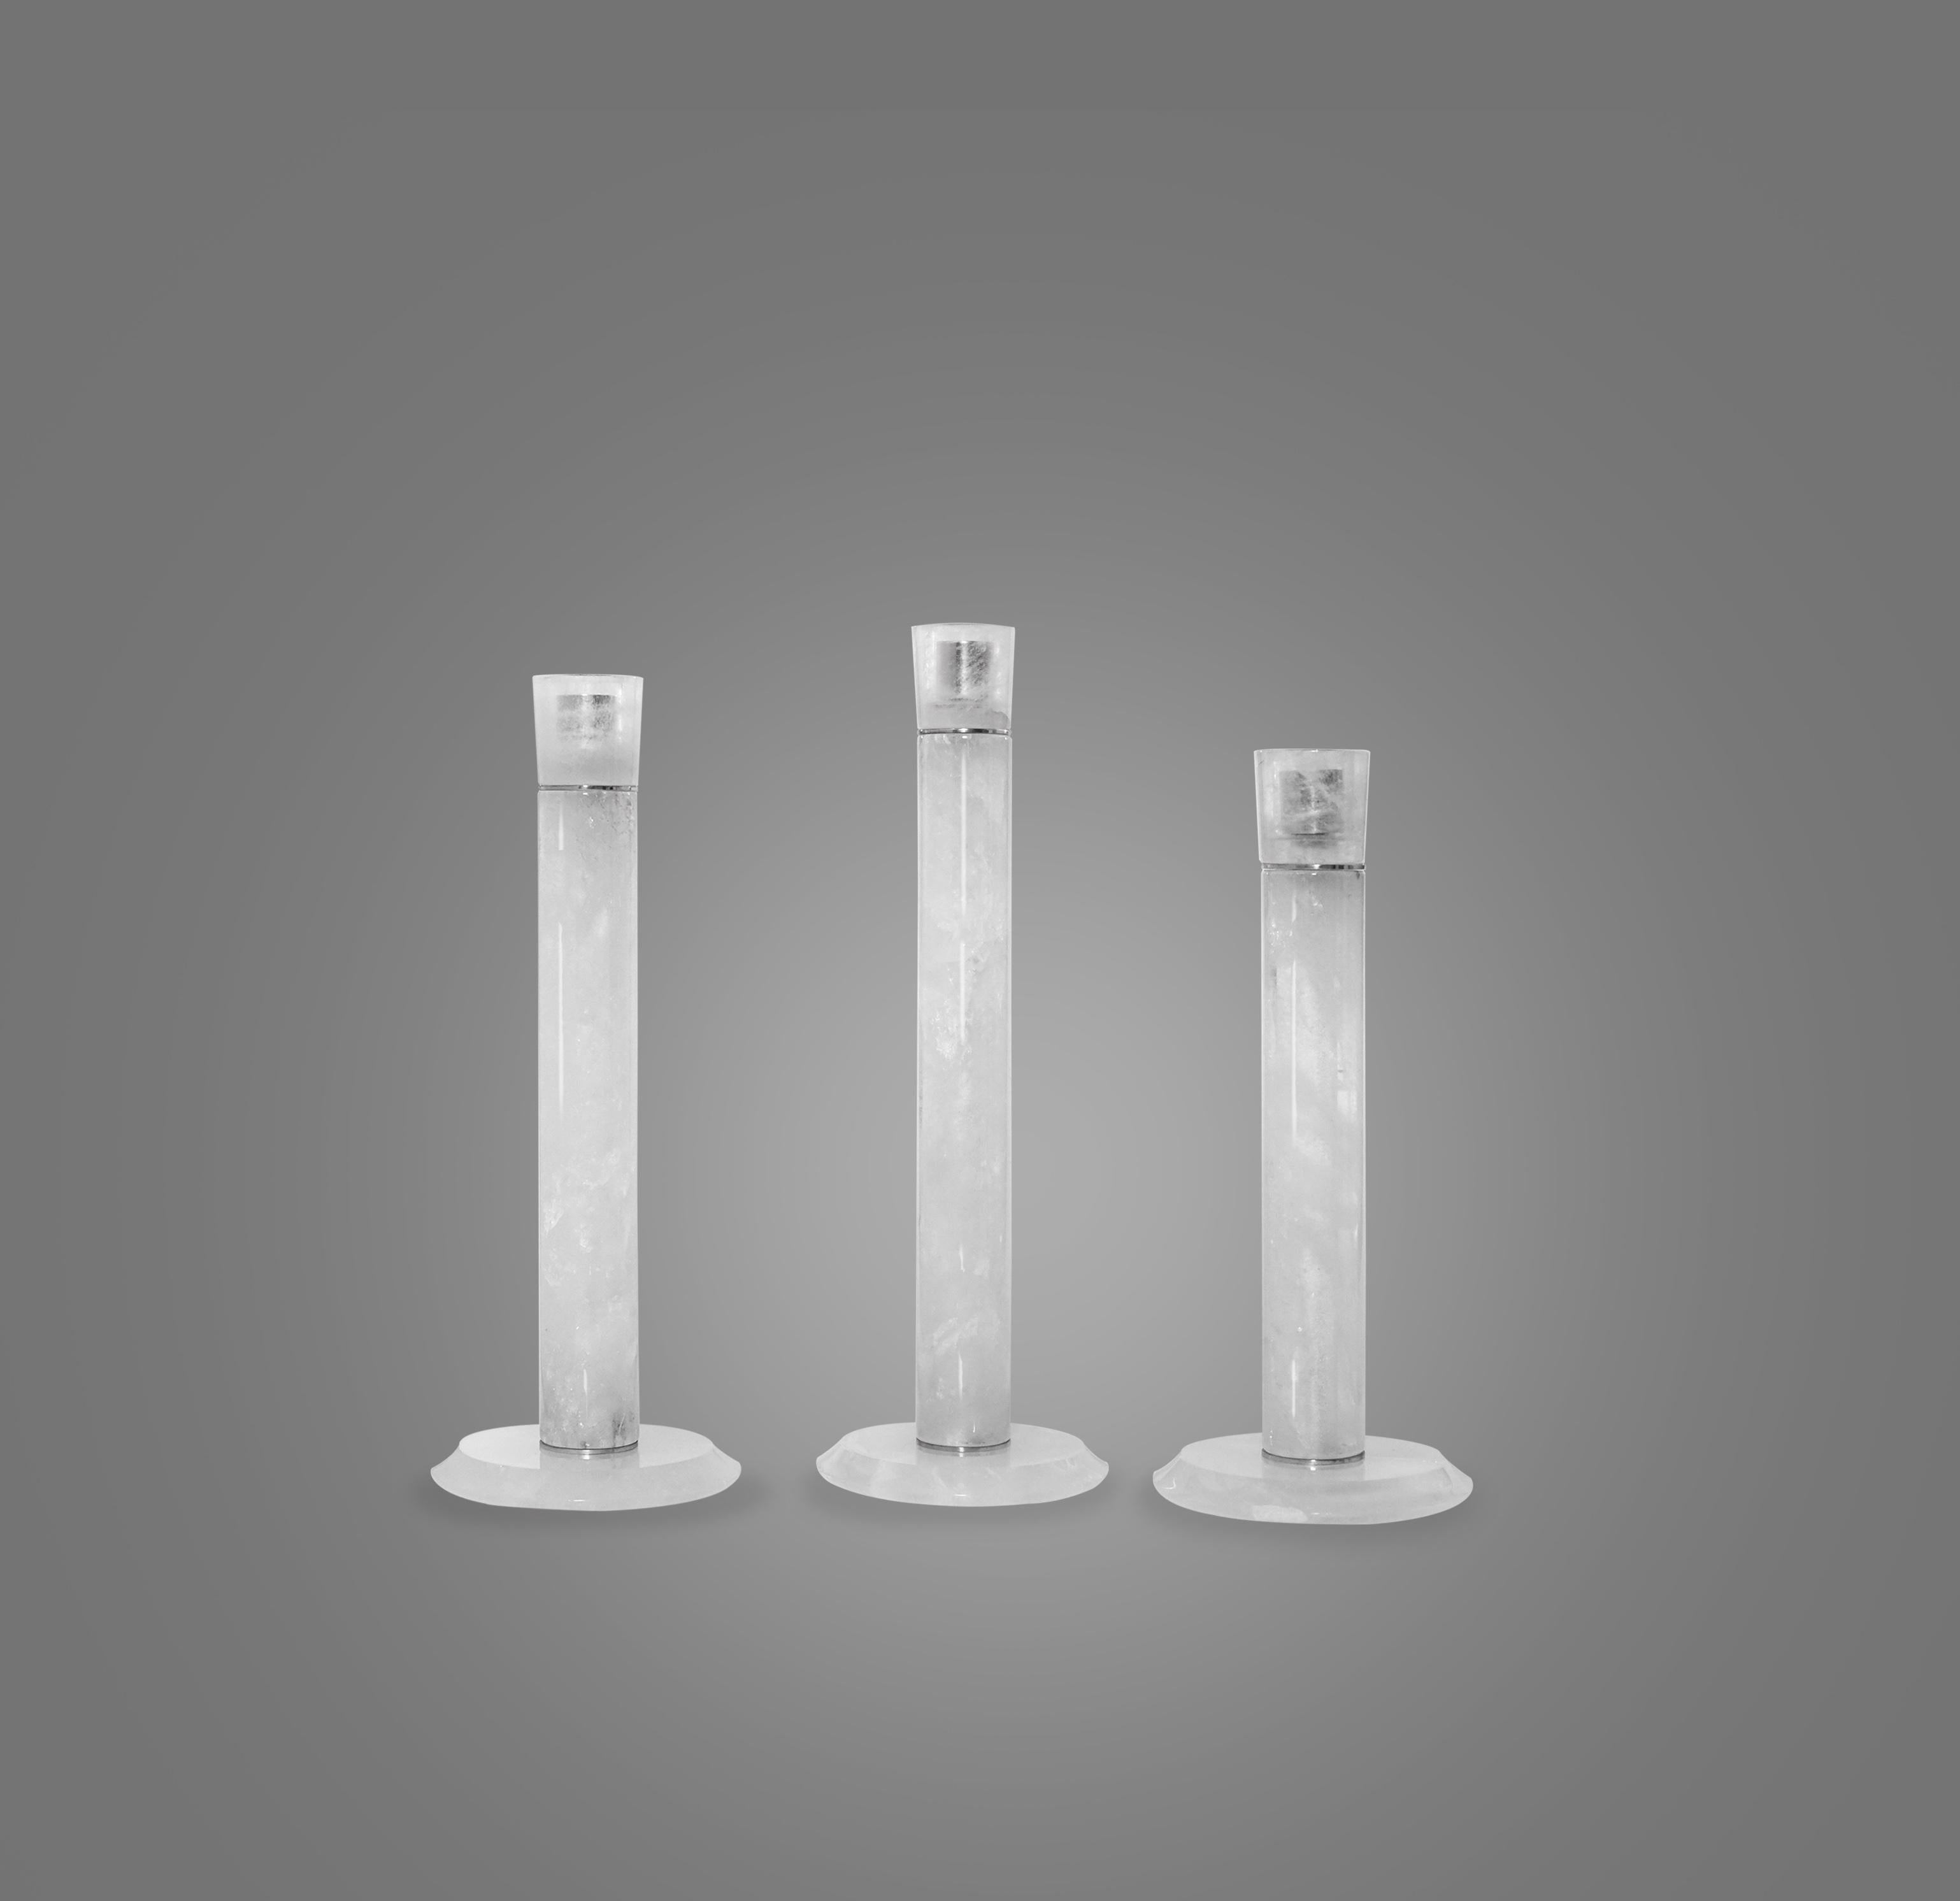 Group of three modern rock crystal candleholders in various height. Created by Phoenix Gallery, NYC.
Custom size, and quantity upon request.
Measures: 13.25